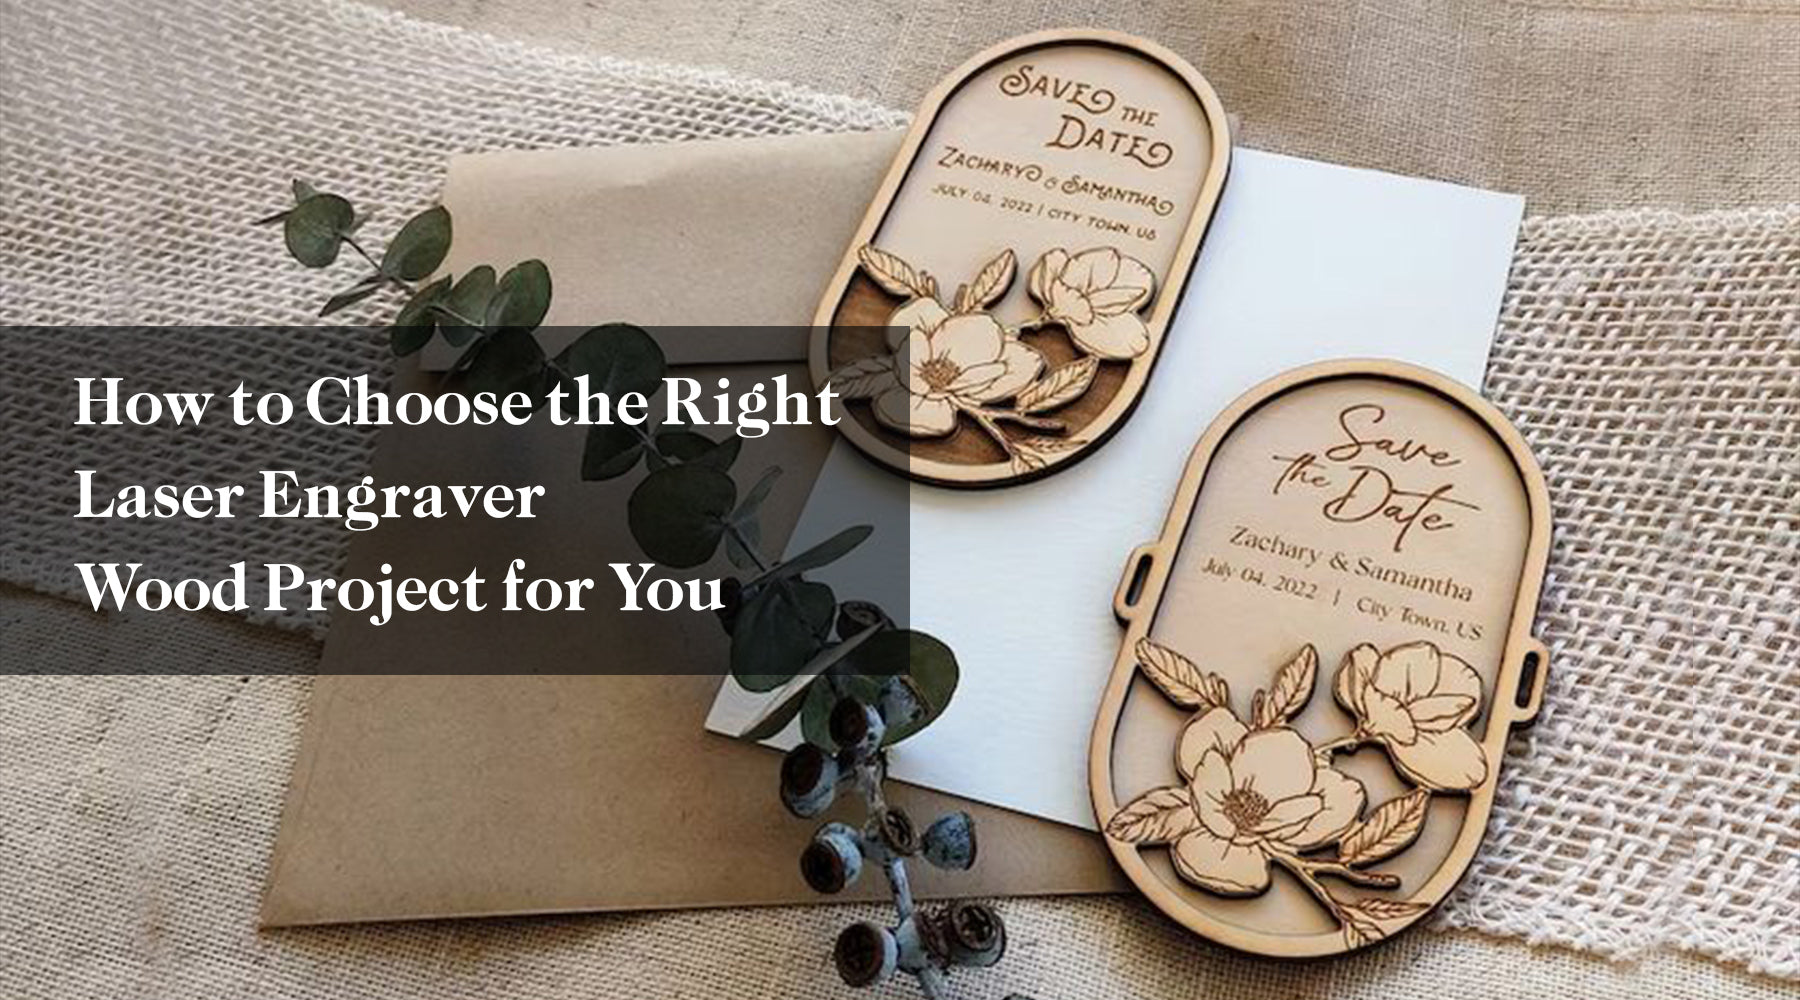 How to Choose the Right Laser Engraver Wood Project for You